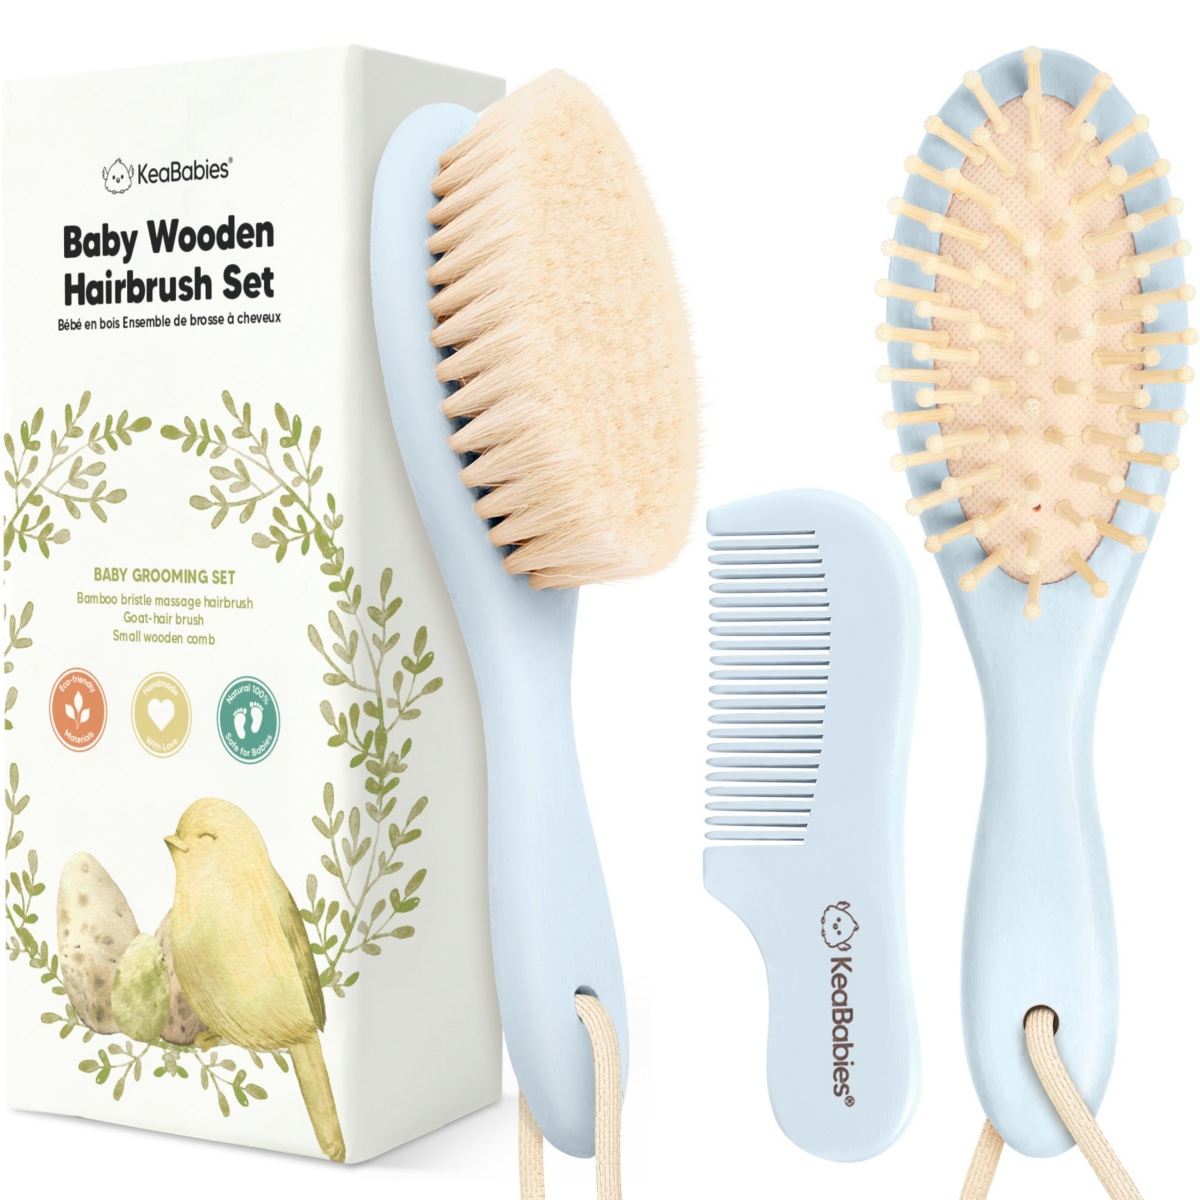 Keababies Baby Hair Brush And Comb Set, Oval Wooden Baby Brush Set For Newborns, Infant, Toddler Grooming Kit In Frost